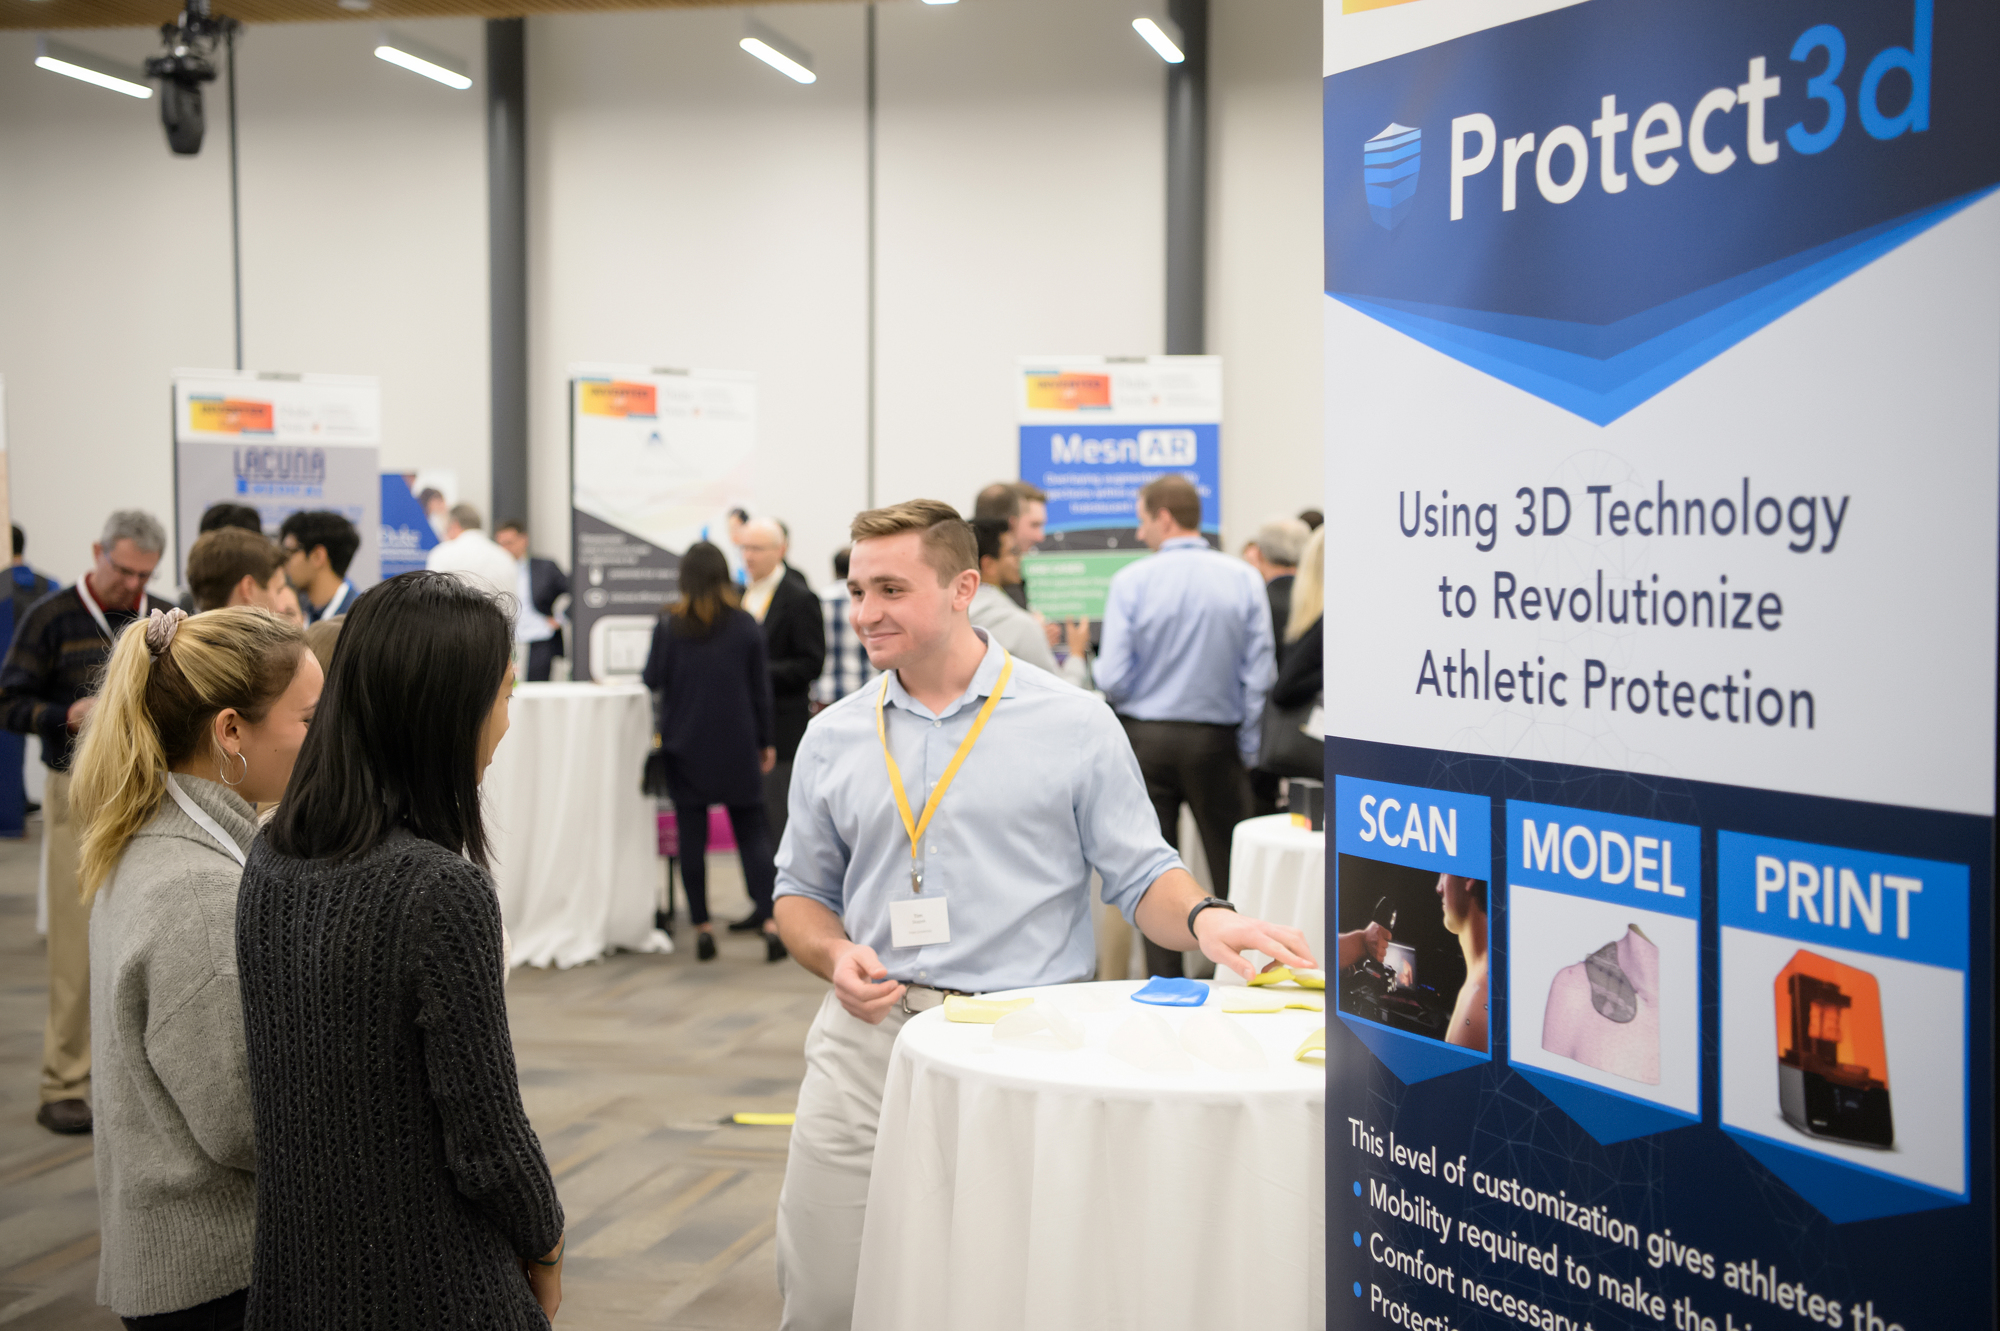 Protect3d is a student startup founded by Kevin Gehsmann, Clark Bulleit, Tim Skapek. What began as a novel engineering project helping former Duke QB and #6 overall draft pick Daniel Jones return to the field has become a startup revolutionizing protective equipment used in all levels of athletics and beyond.